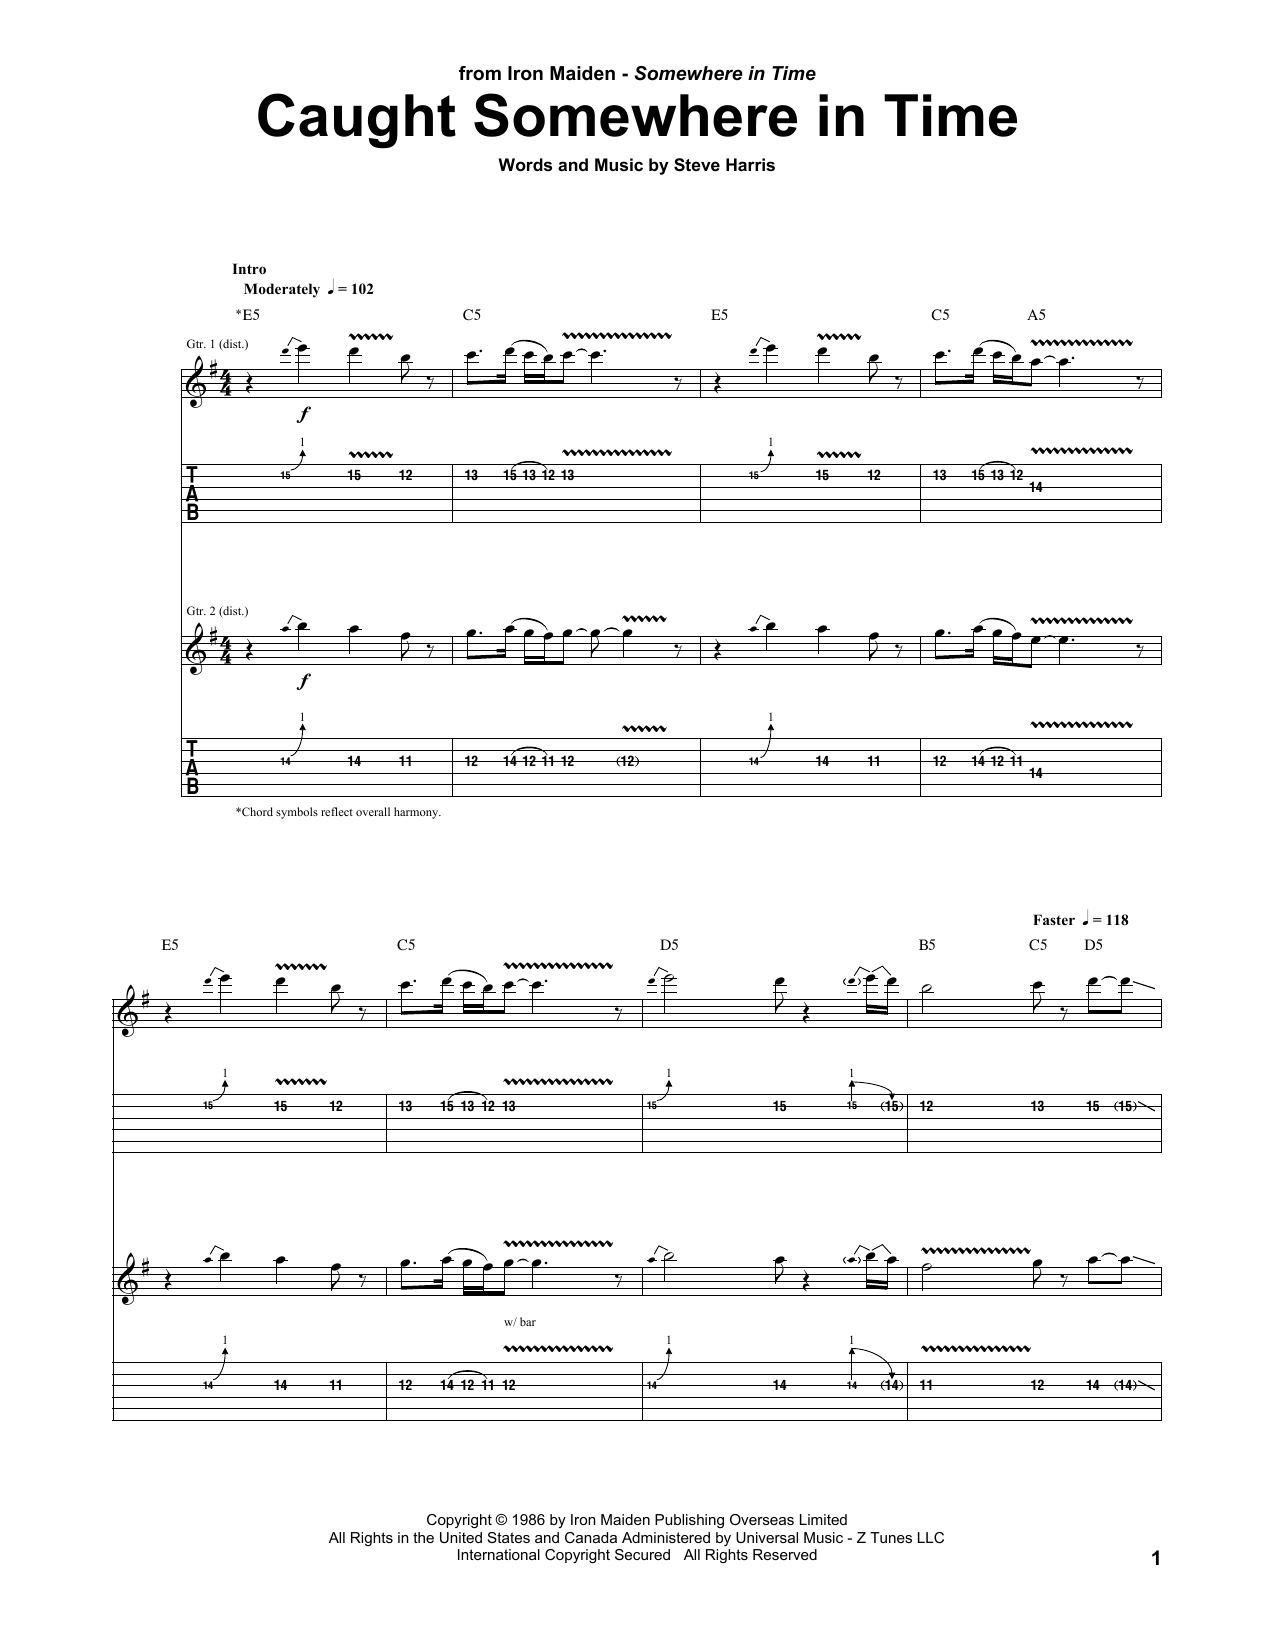 Download Iron Maiden Caught Somewhere In Time Sheet Music